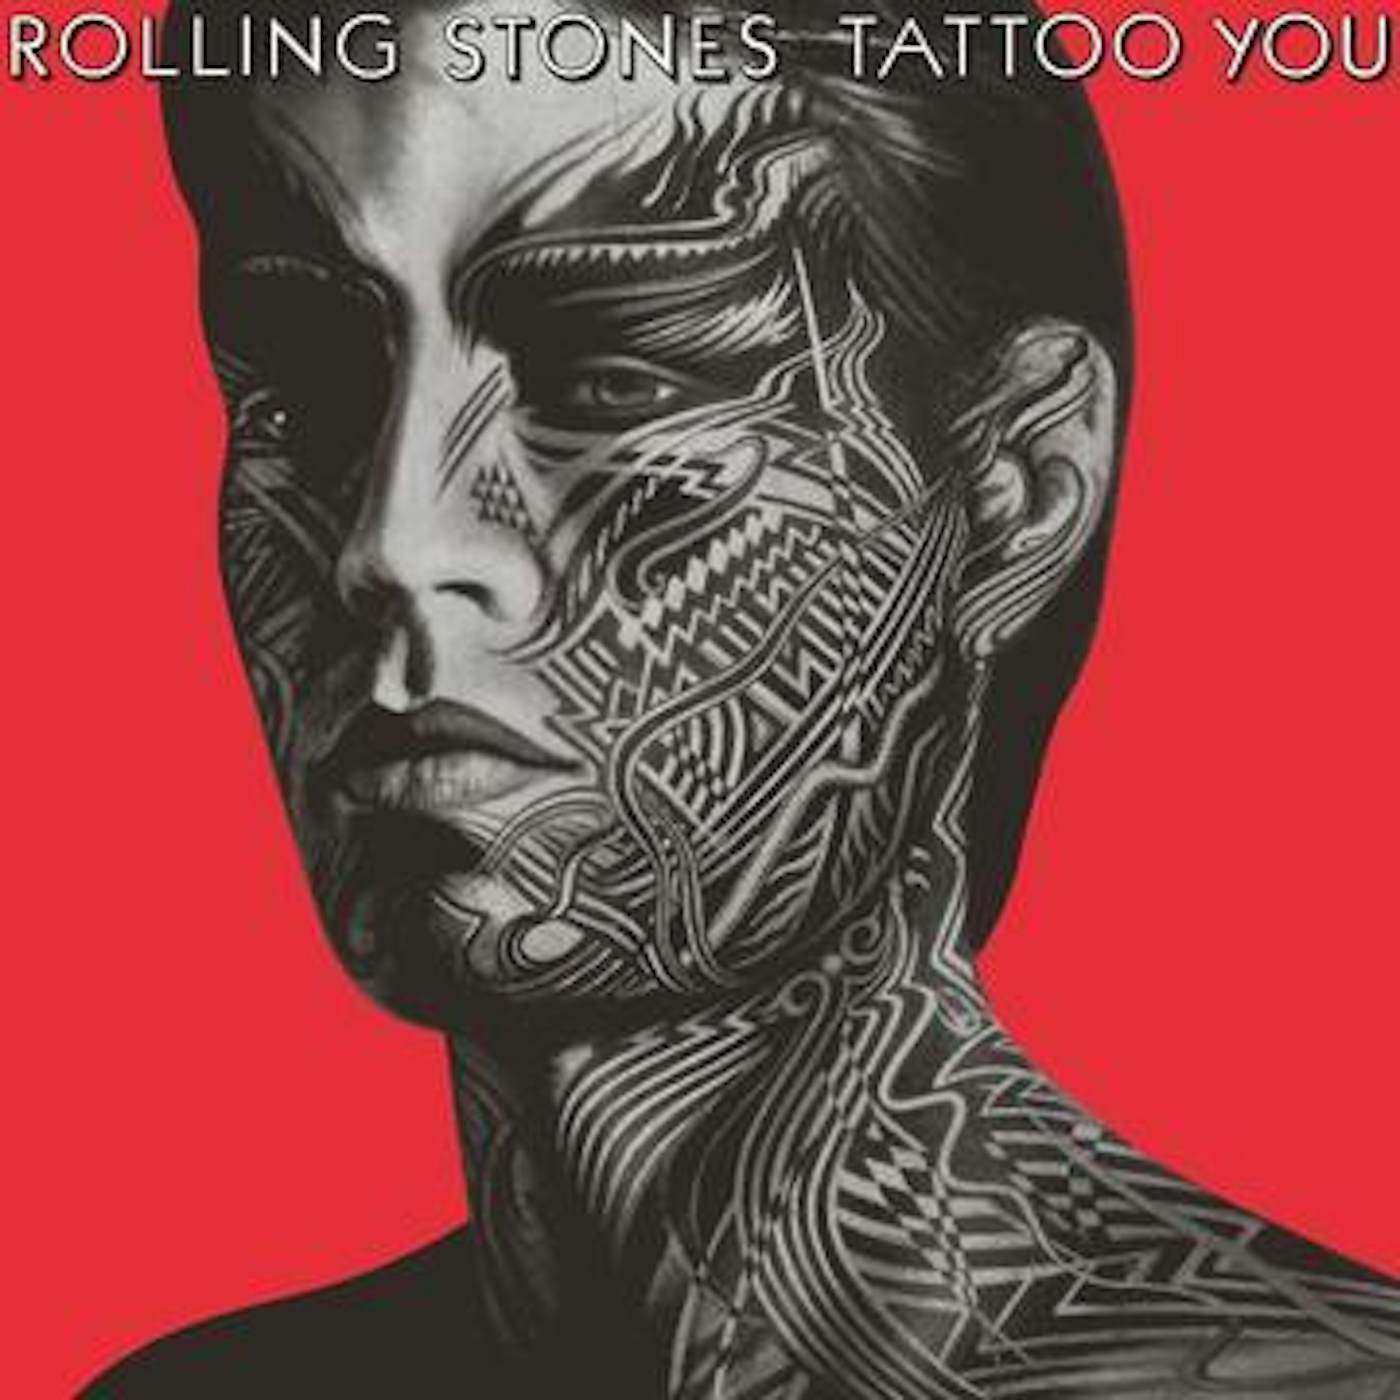 The Rolling Stones- Tattoo You